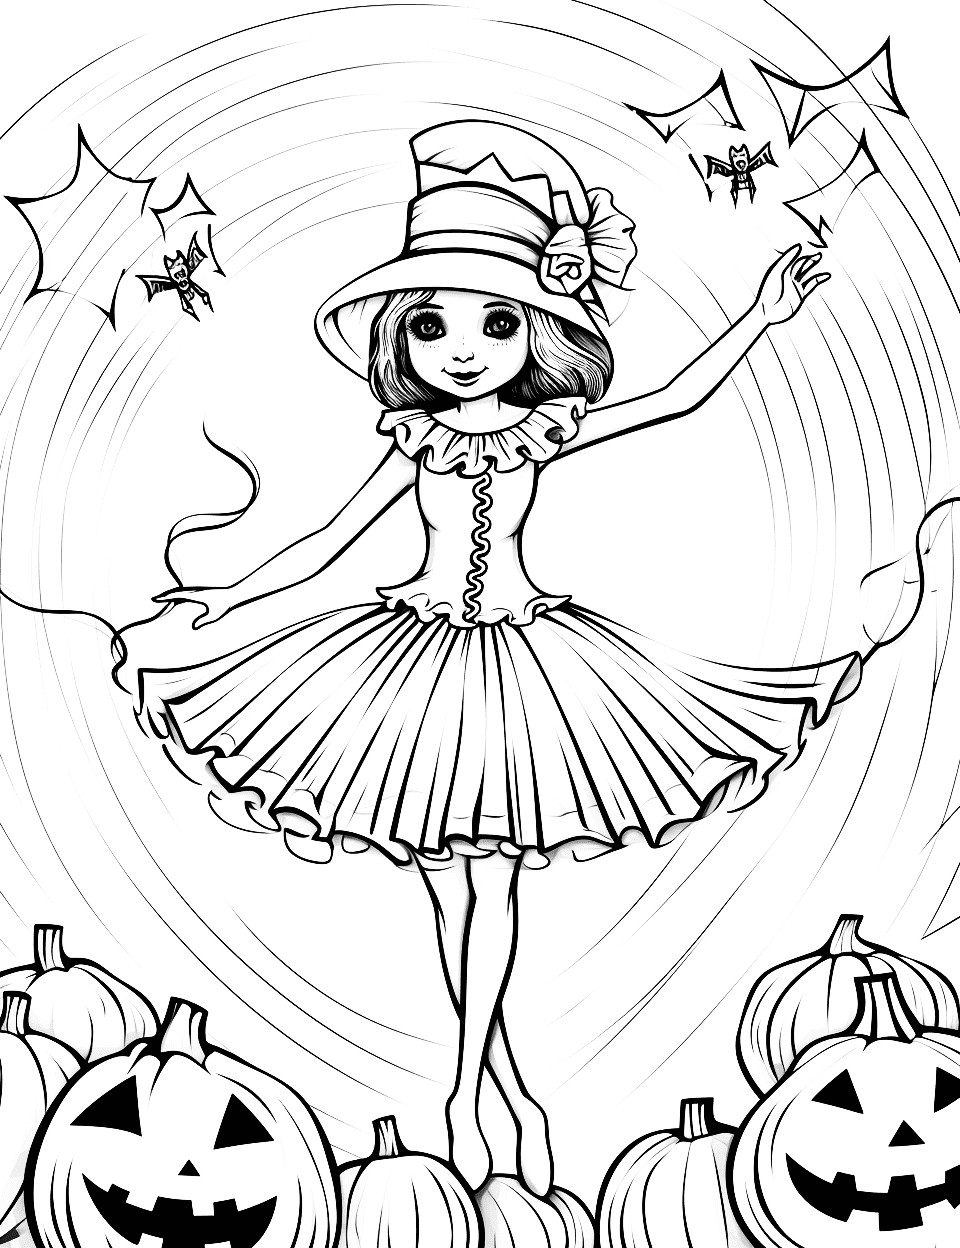 Halloween Ballet Coloring Page - A graceful ballerina dressed in a ghostly costume dancing in a cobweb-covered stage setting.